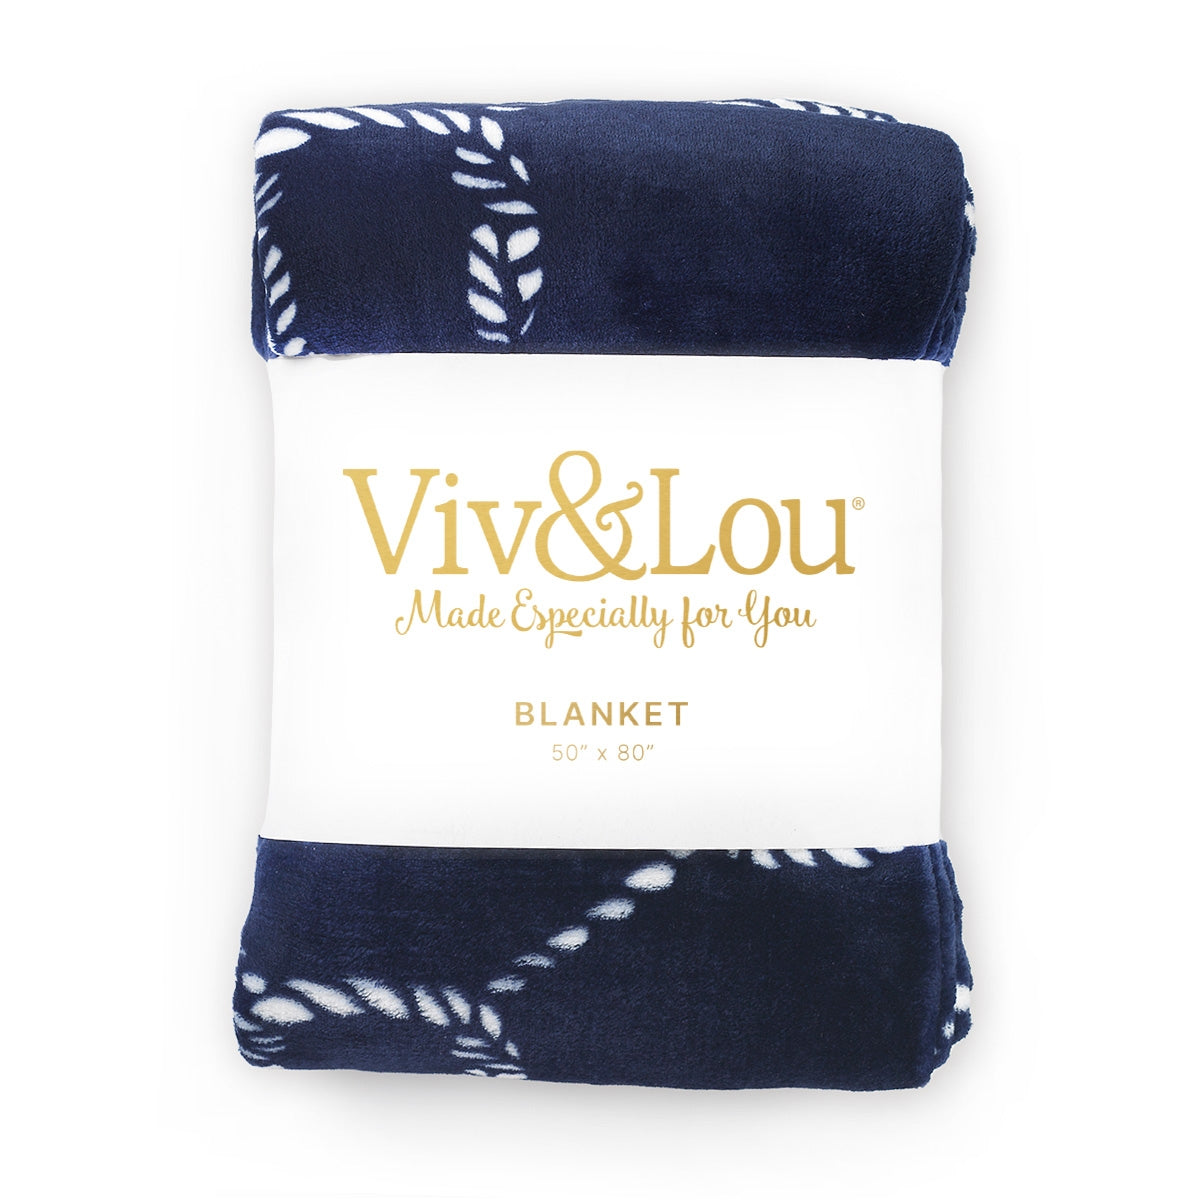 Knot-ical Blanket